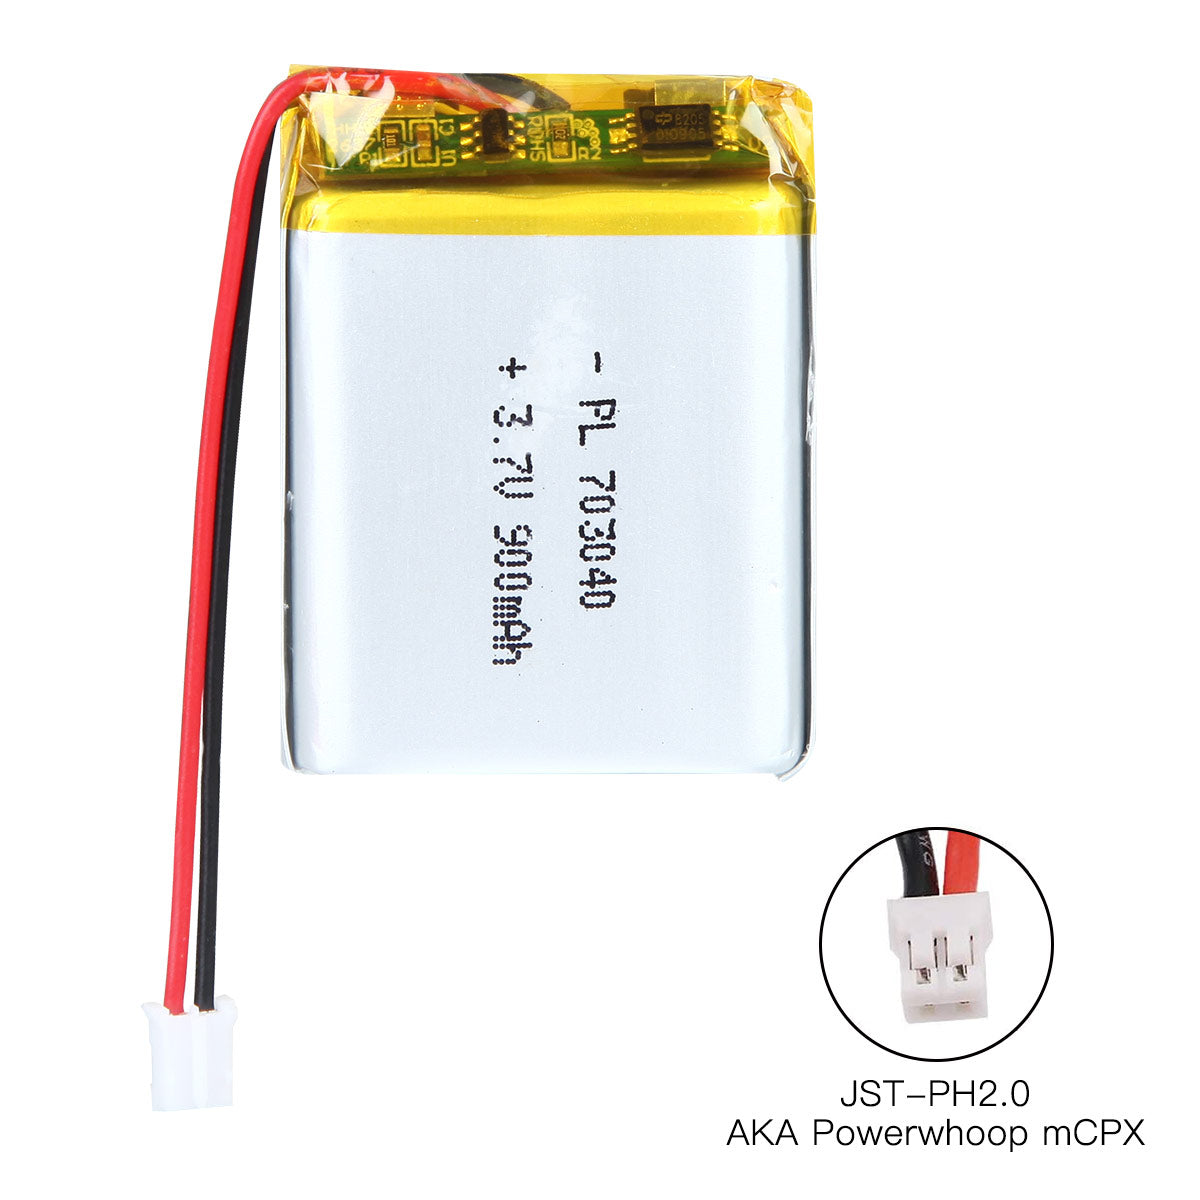 YDL 3.7V 900mAh 703040 Rechargeable Lithium Polymer Battery Length 42mm